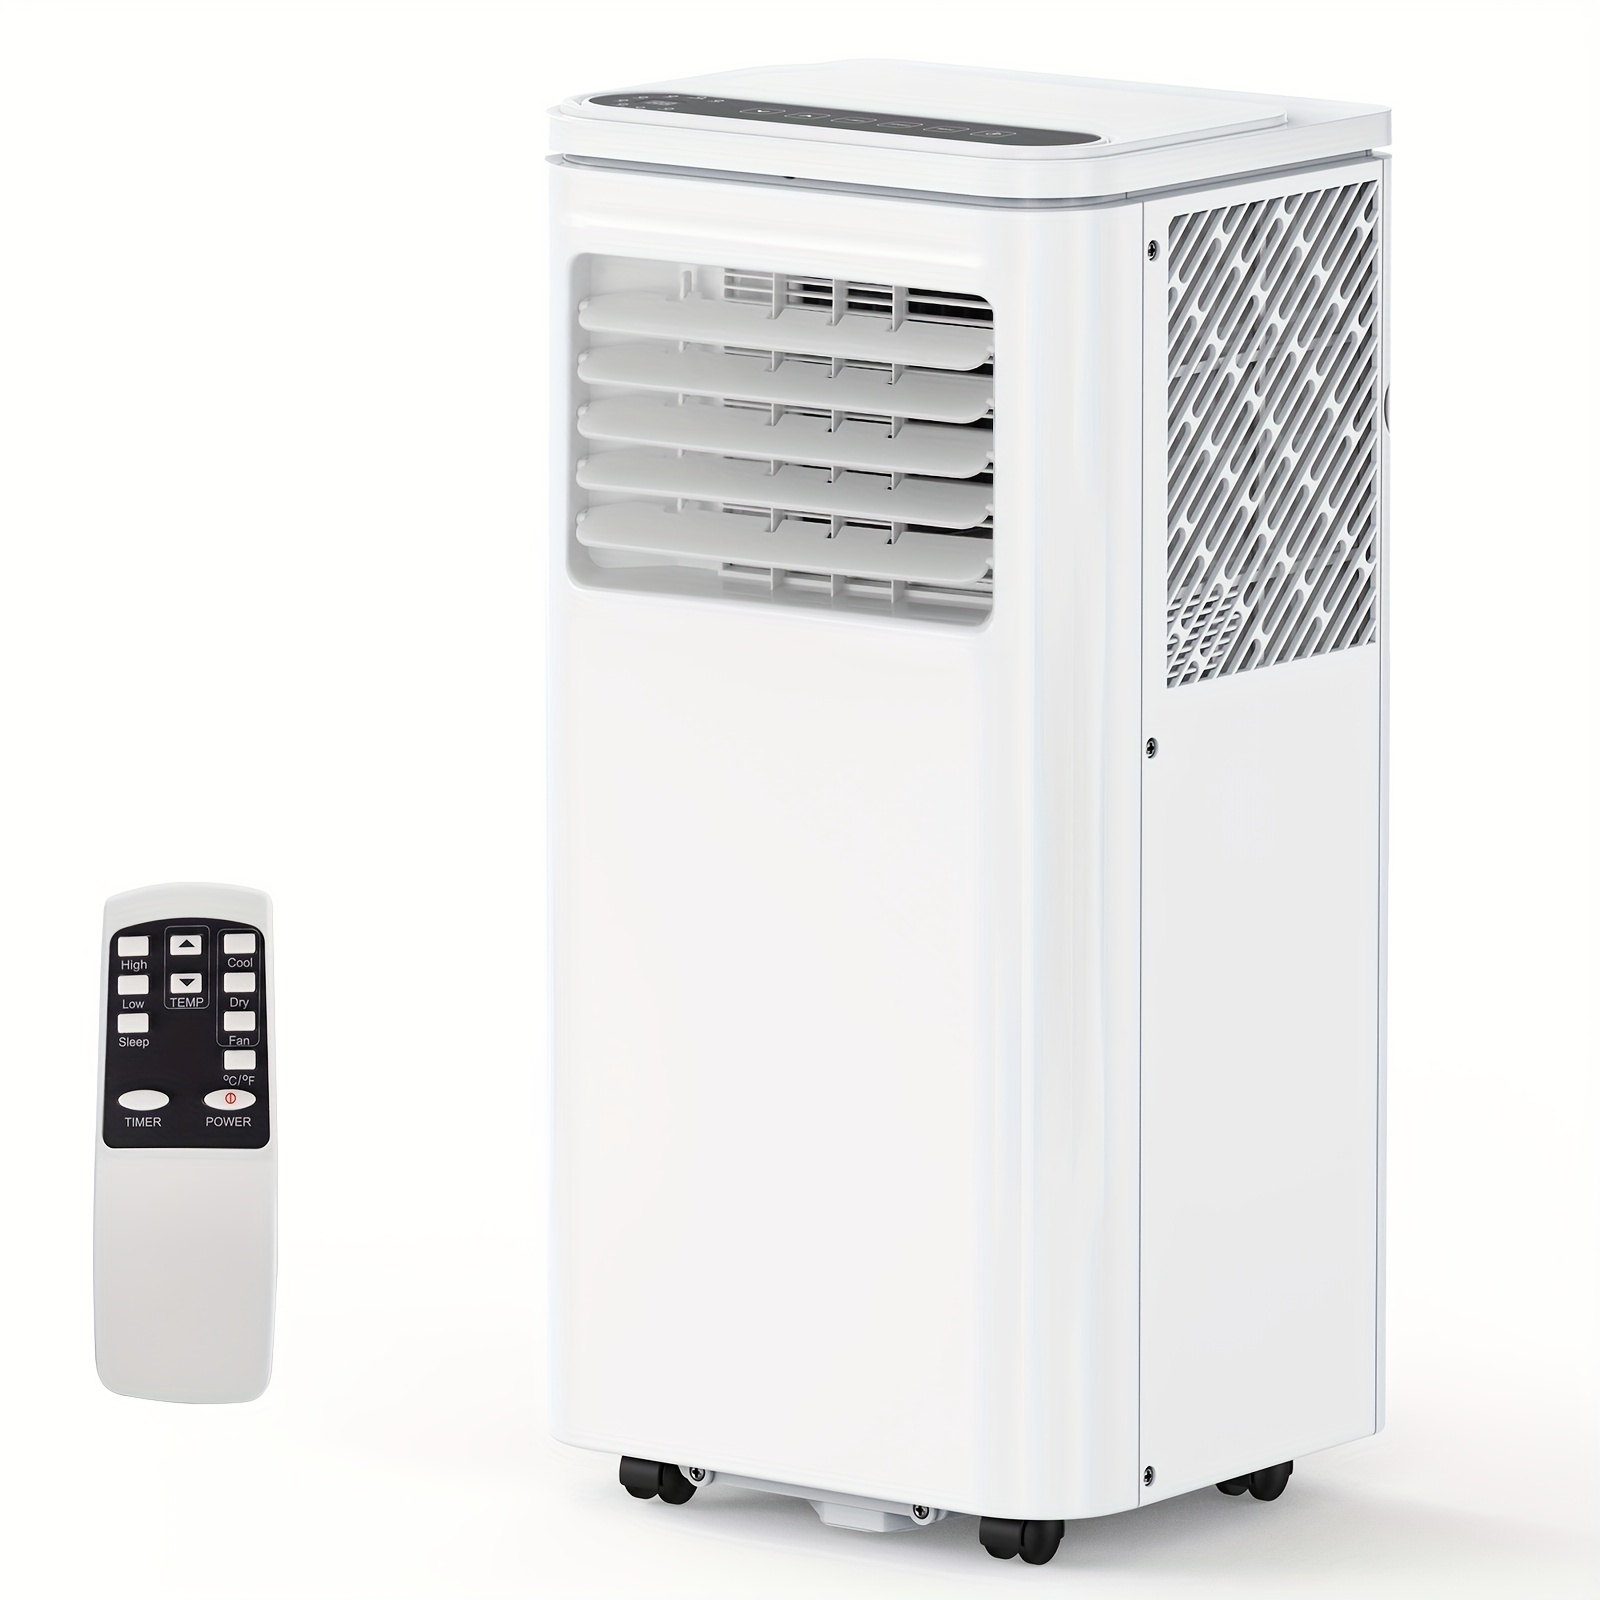 

Hufy , 10000 Btu With Window Kit, Pipe Cooling, Remote Control Up To 450 Sq. Ft For Home Office Bedrooms, White